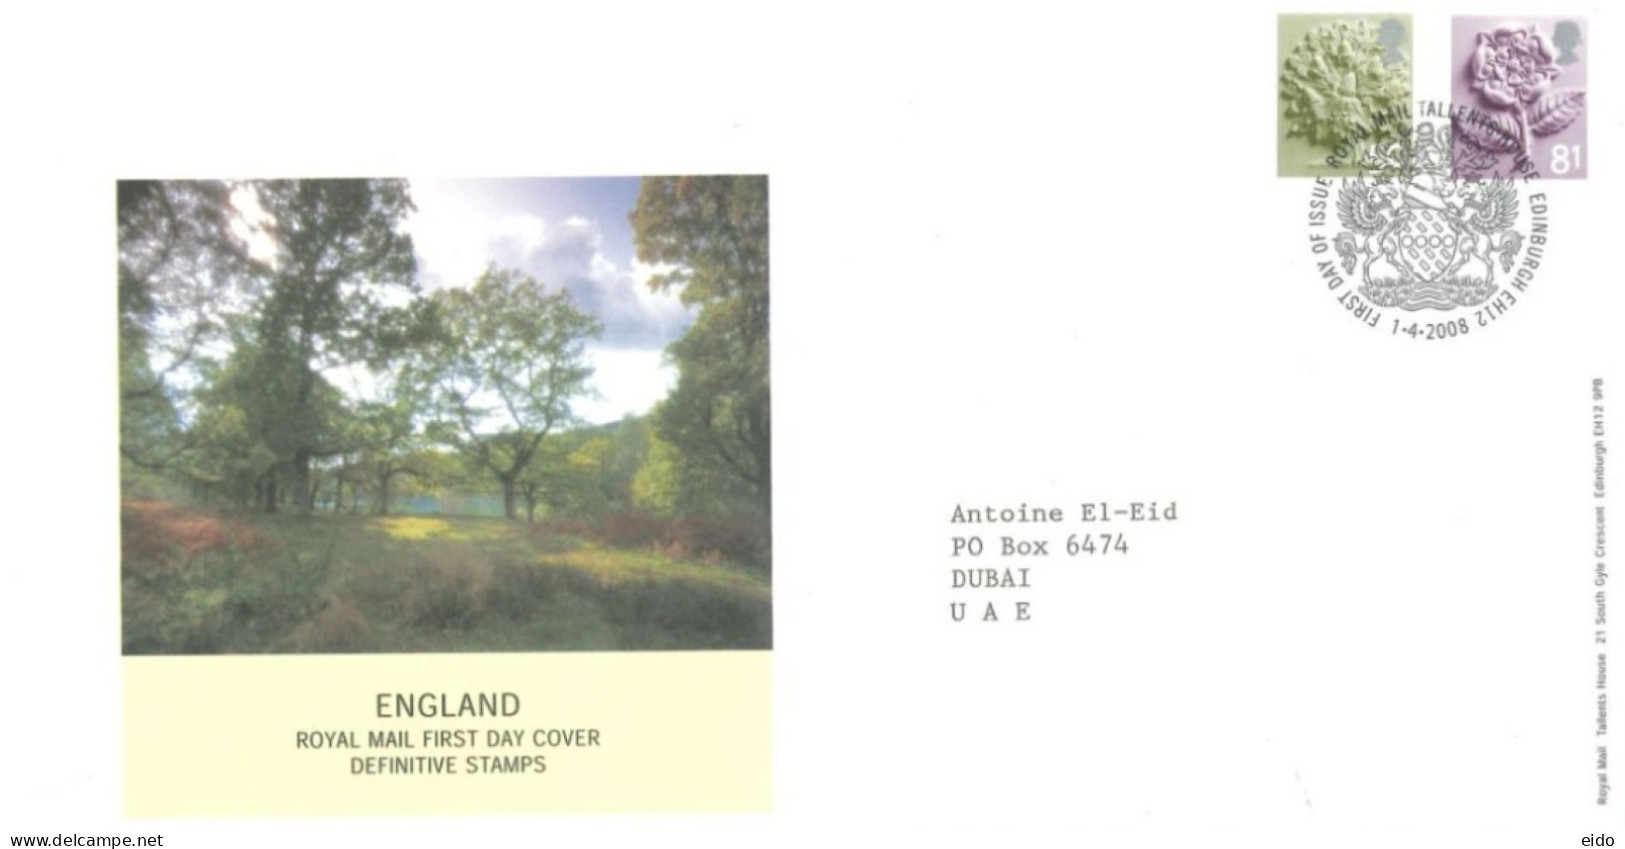 GREAT BRITAIN - 2008, FDC OF ENGLAND ROYAL MAIL DEFINITIVE STAMPS. - Covers & Documents